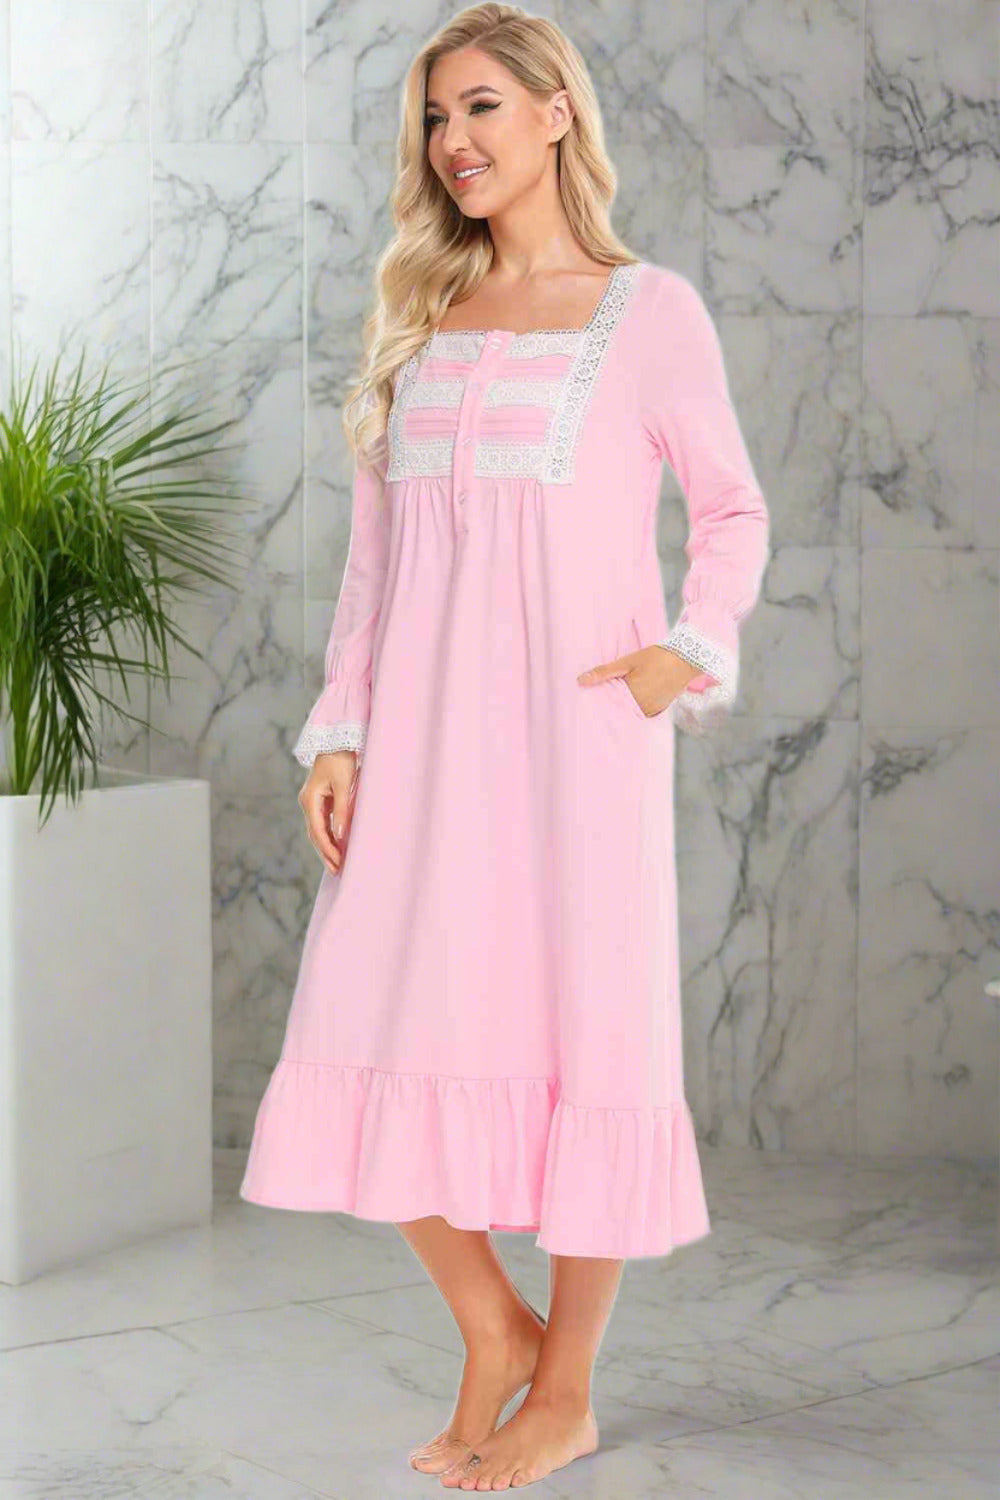 Model wearing traditional long sleeve pink nightgown